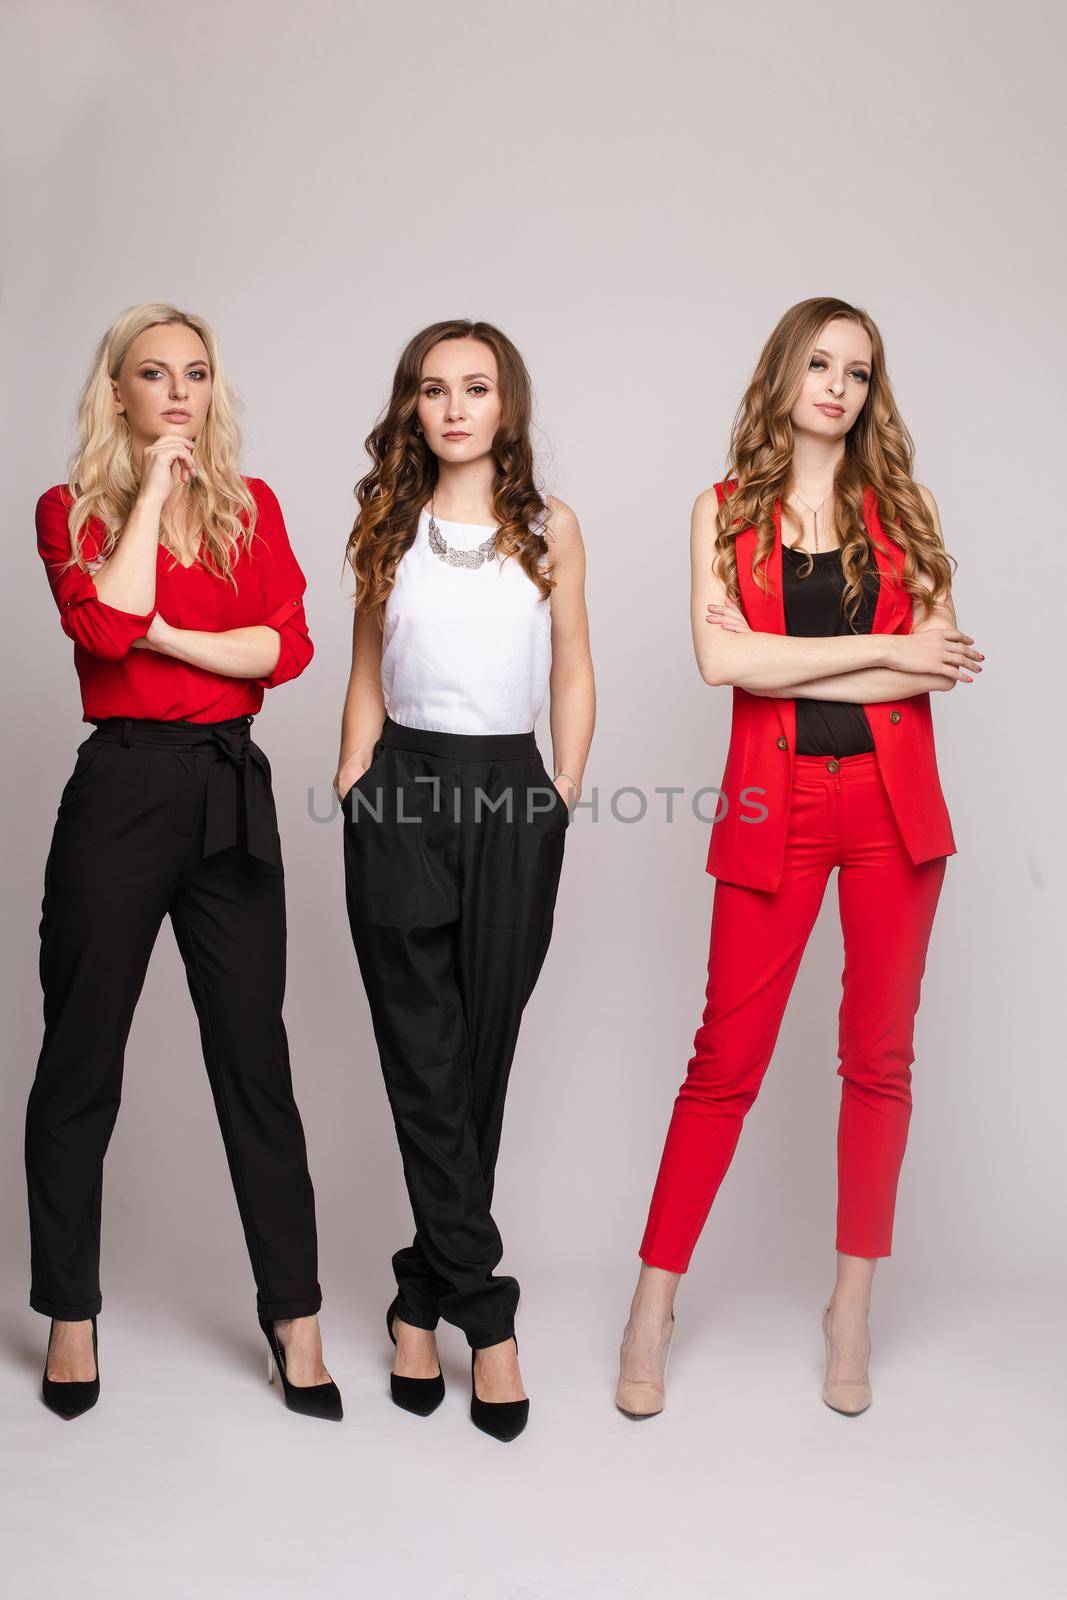 Three gorgeous elegant young women in casual clothes